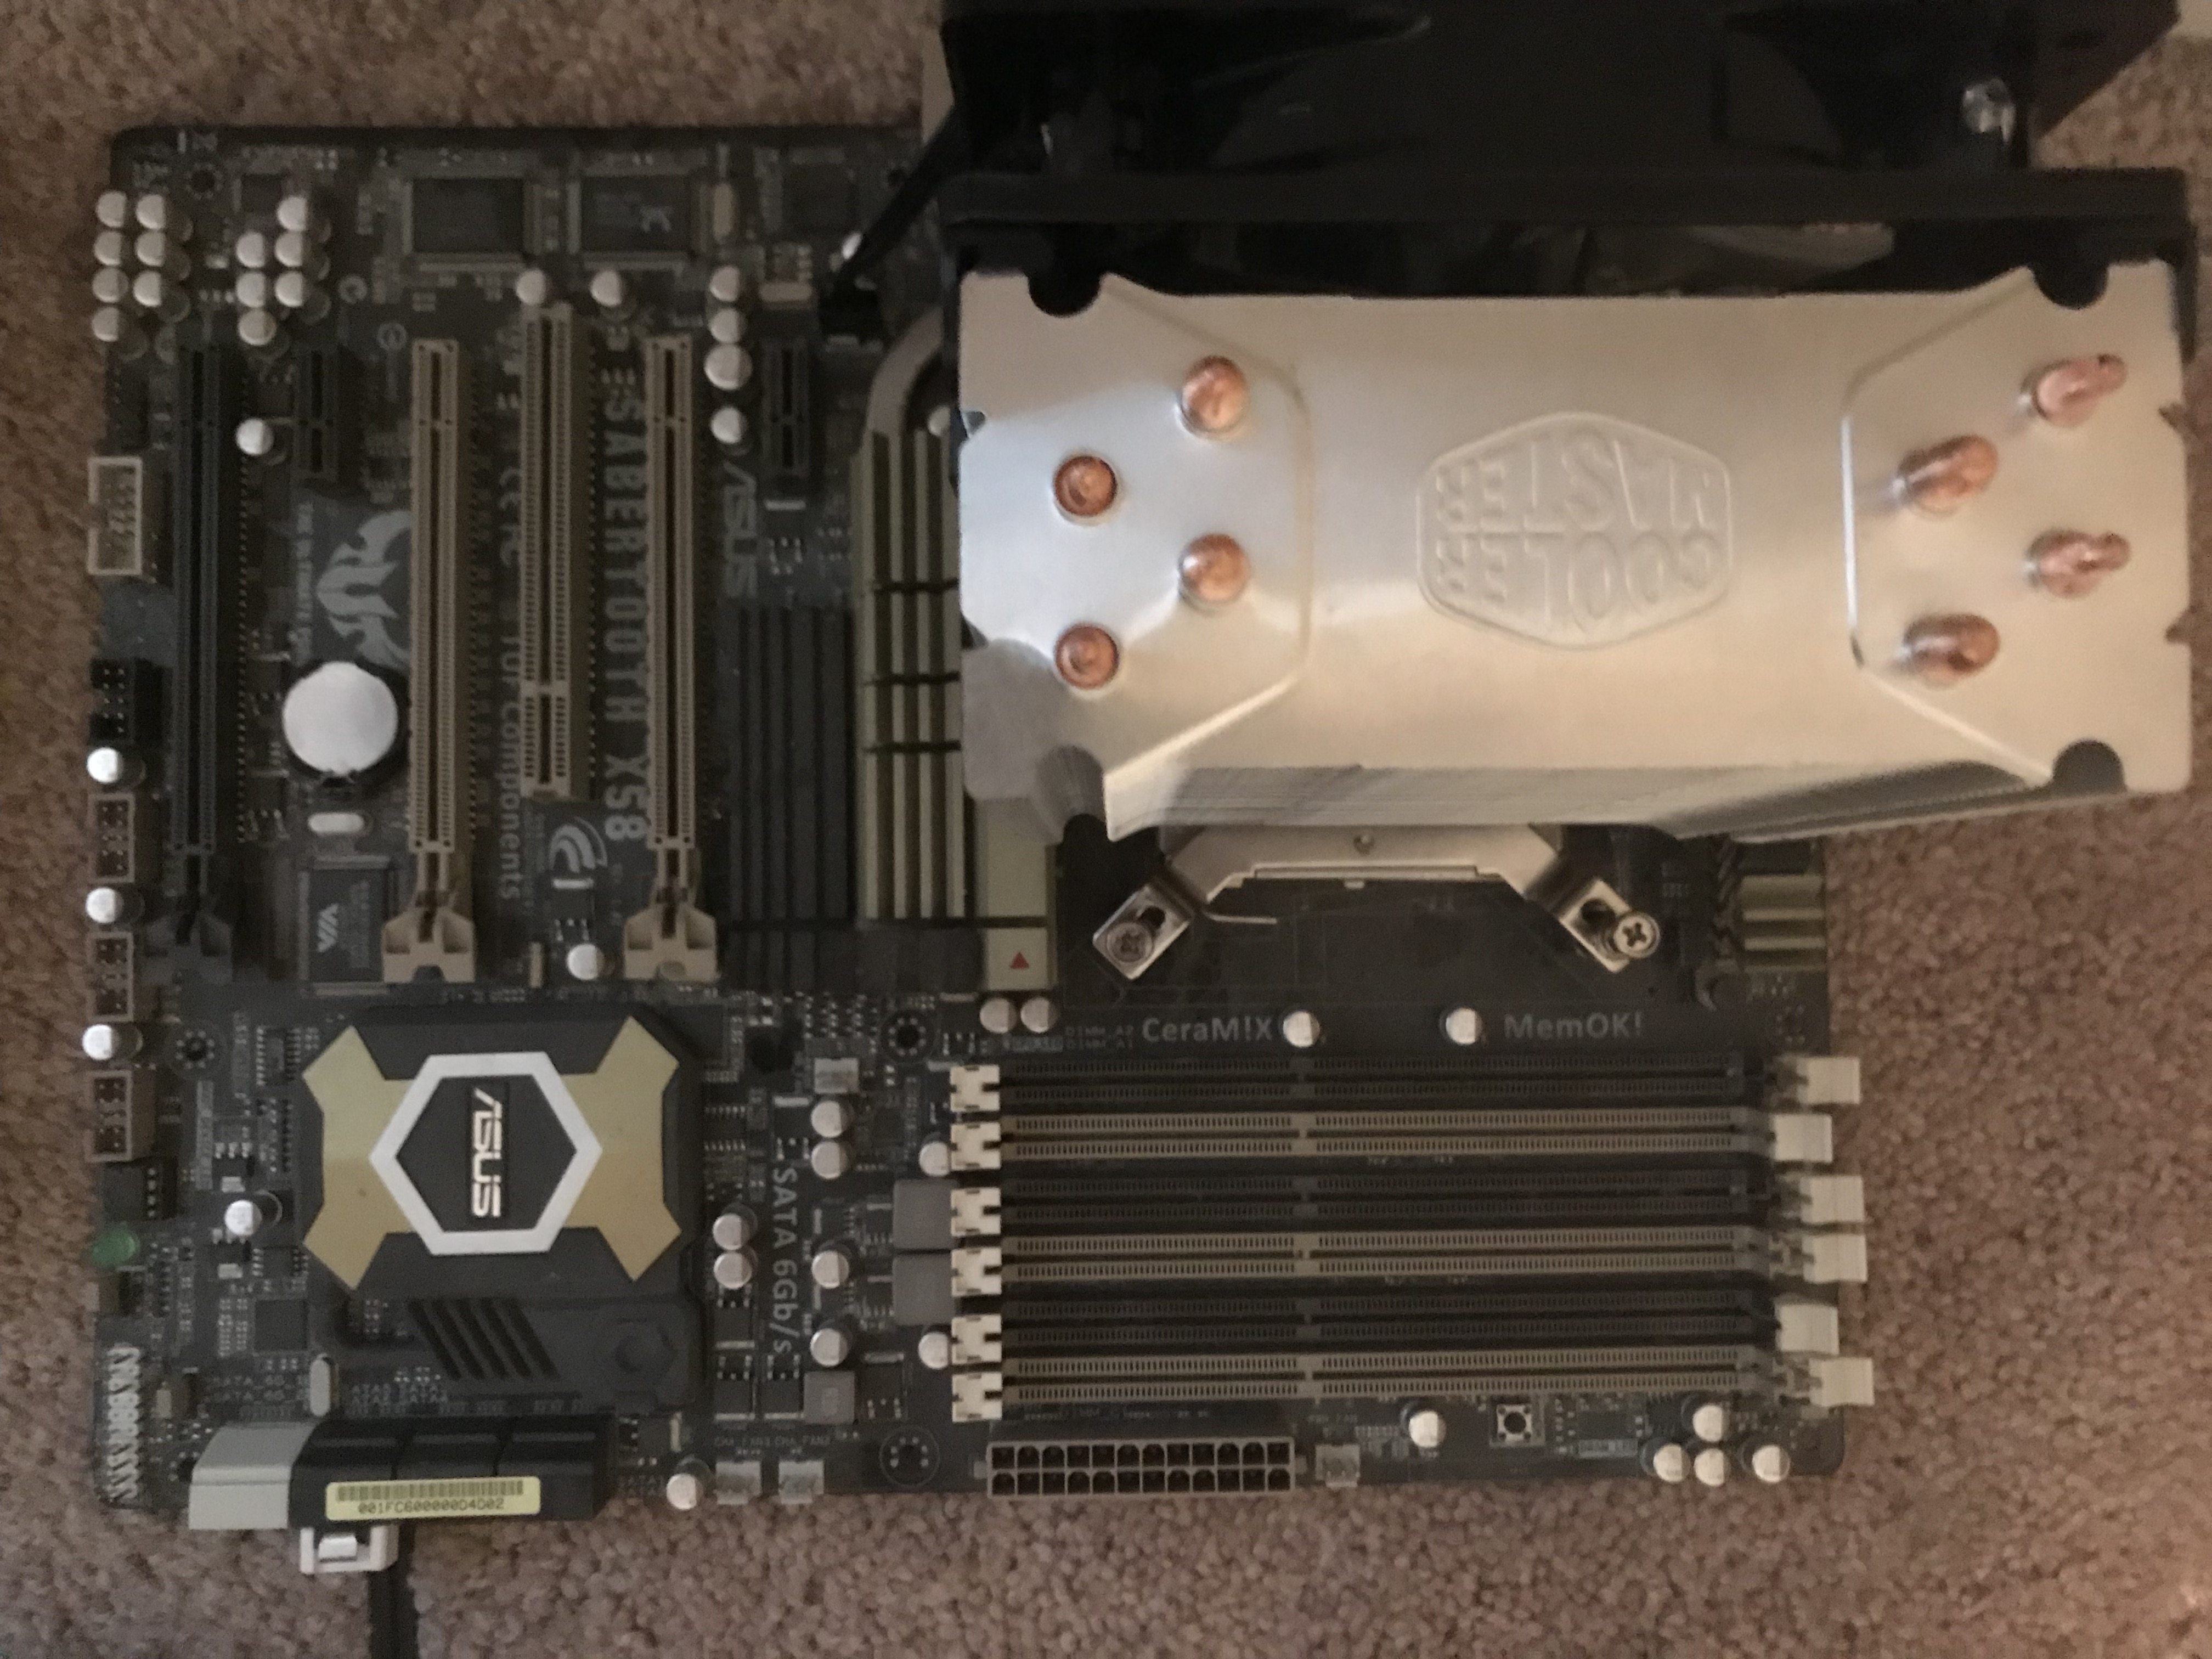 Last Before I Trash It (ASUS X58 Sabertooth) | TechPowerUp Forums